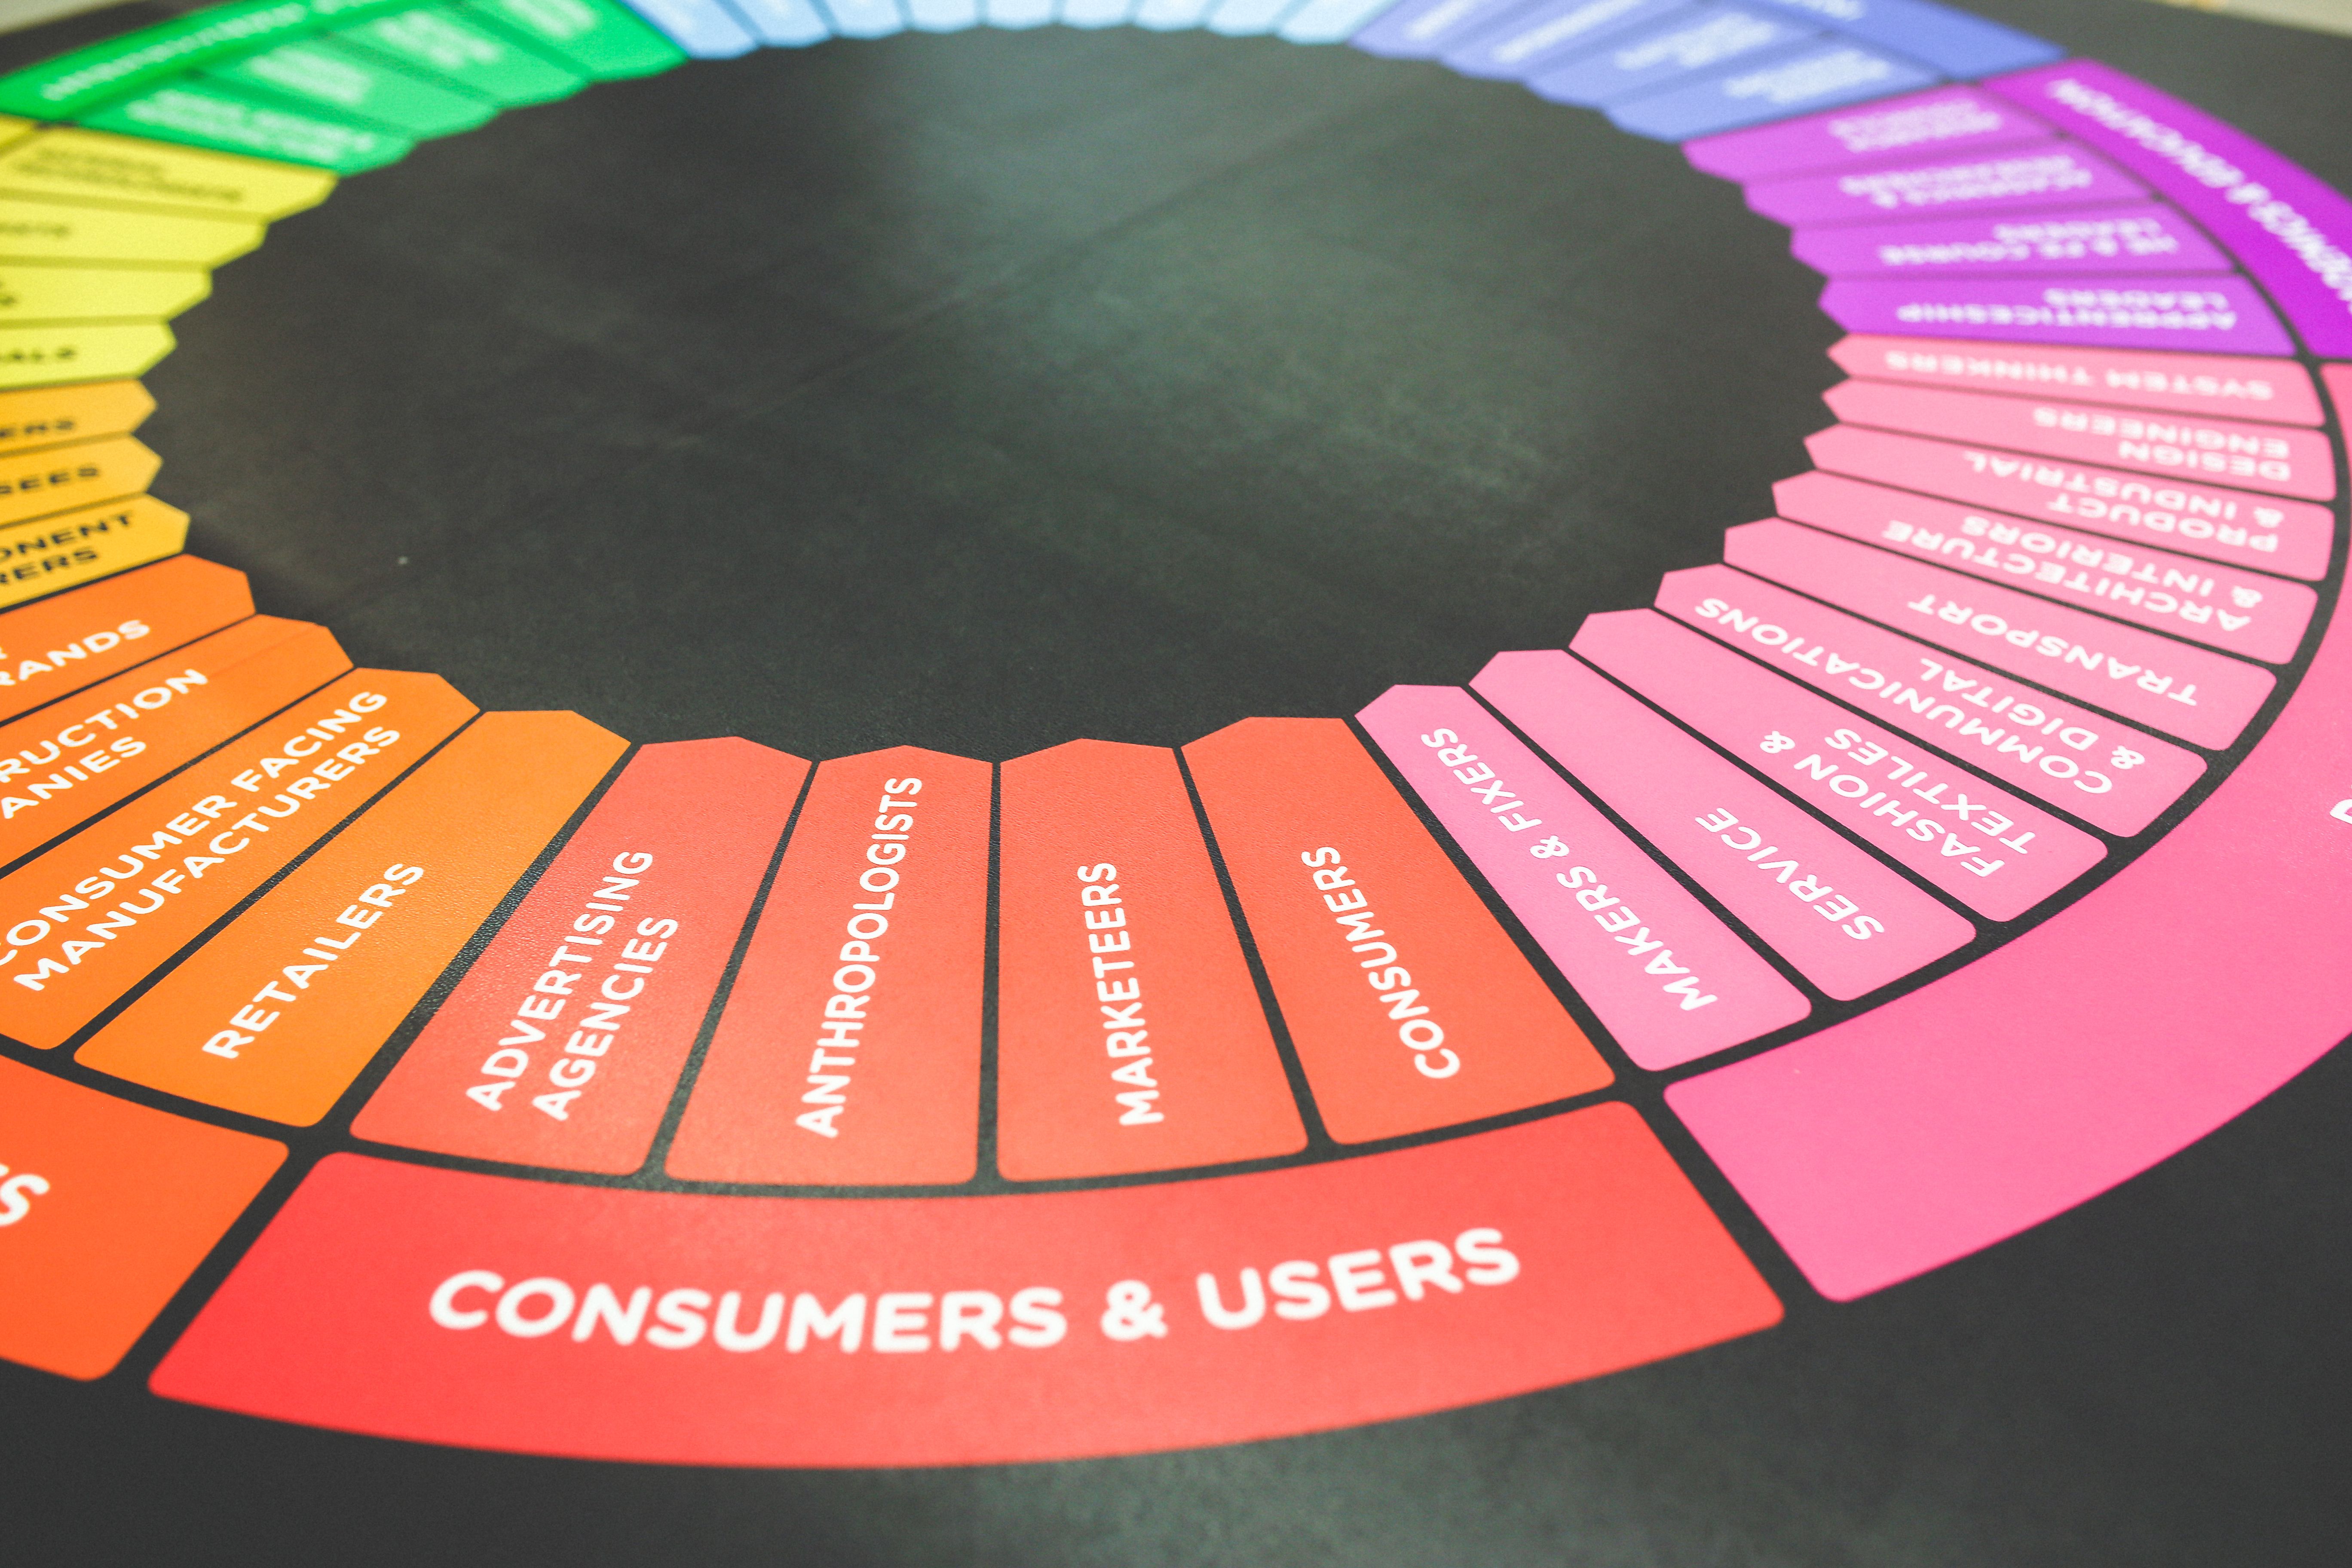 4 UX Documents to Help You Fully Understand Your Users